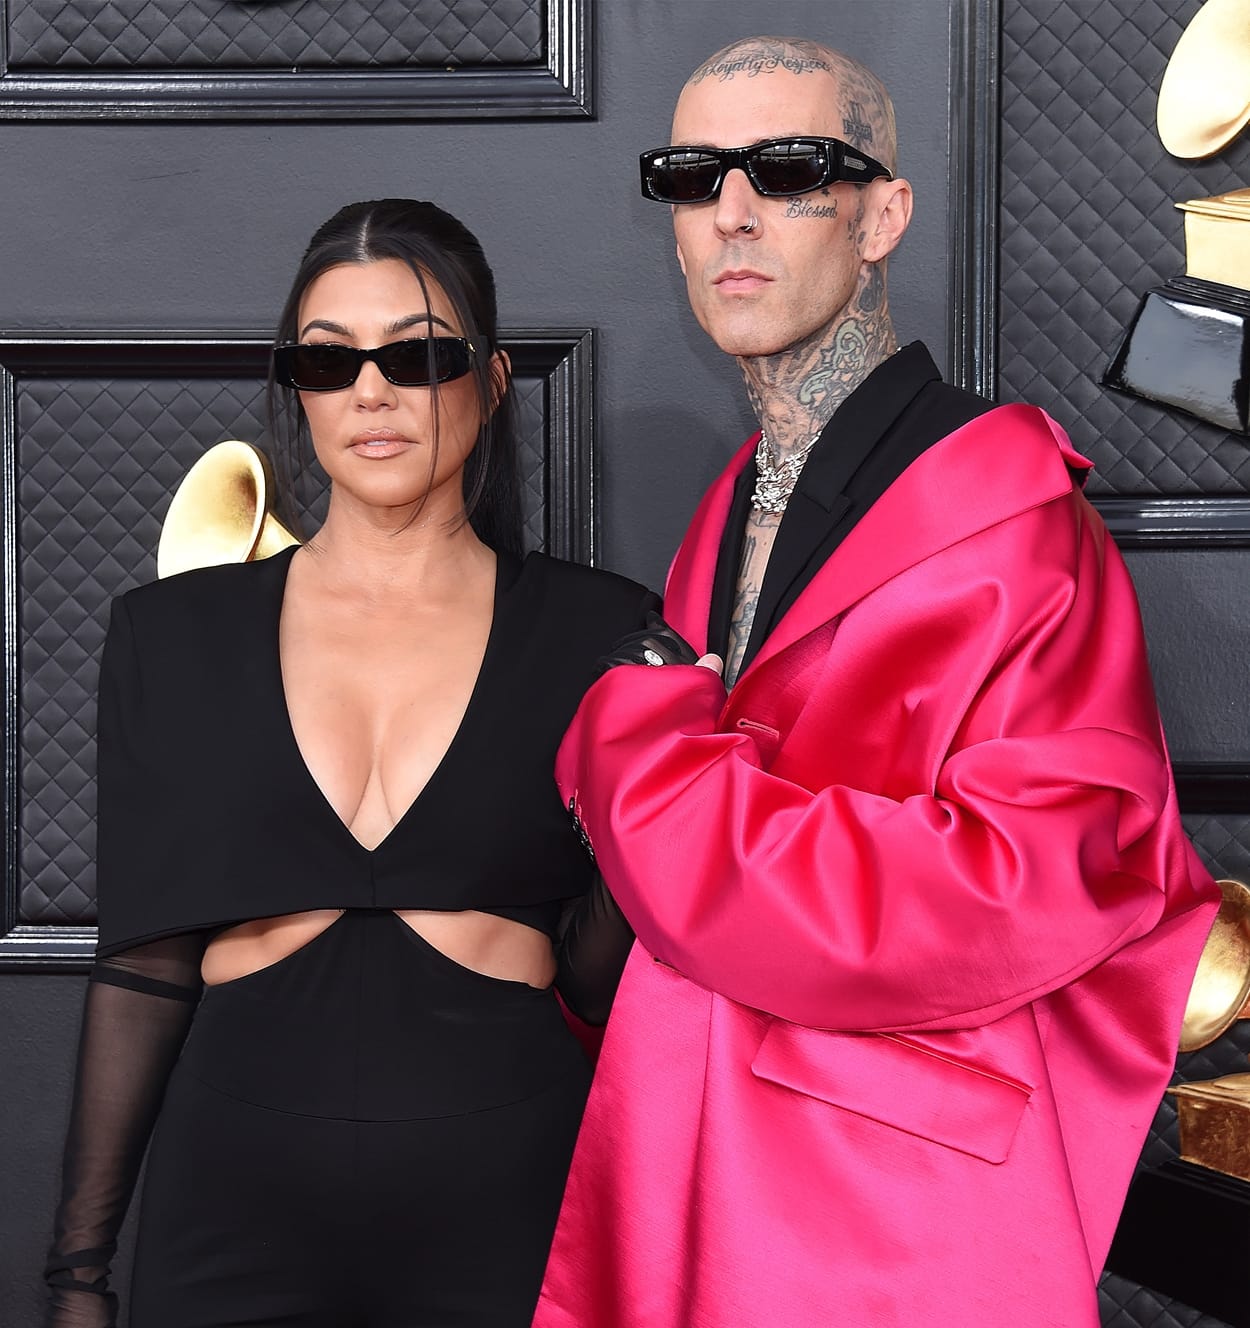 Kourtney Kardashian and Travis Barker legally married on May 15, 2022, at the downtown courthouse in Santa Barbara